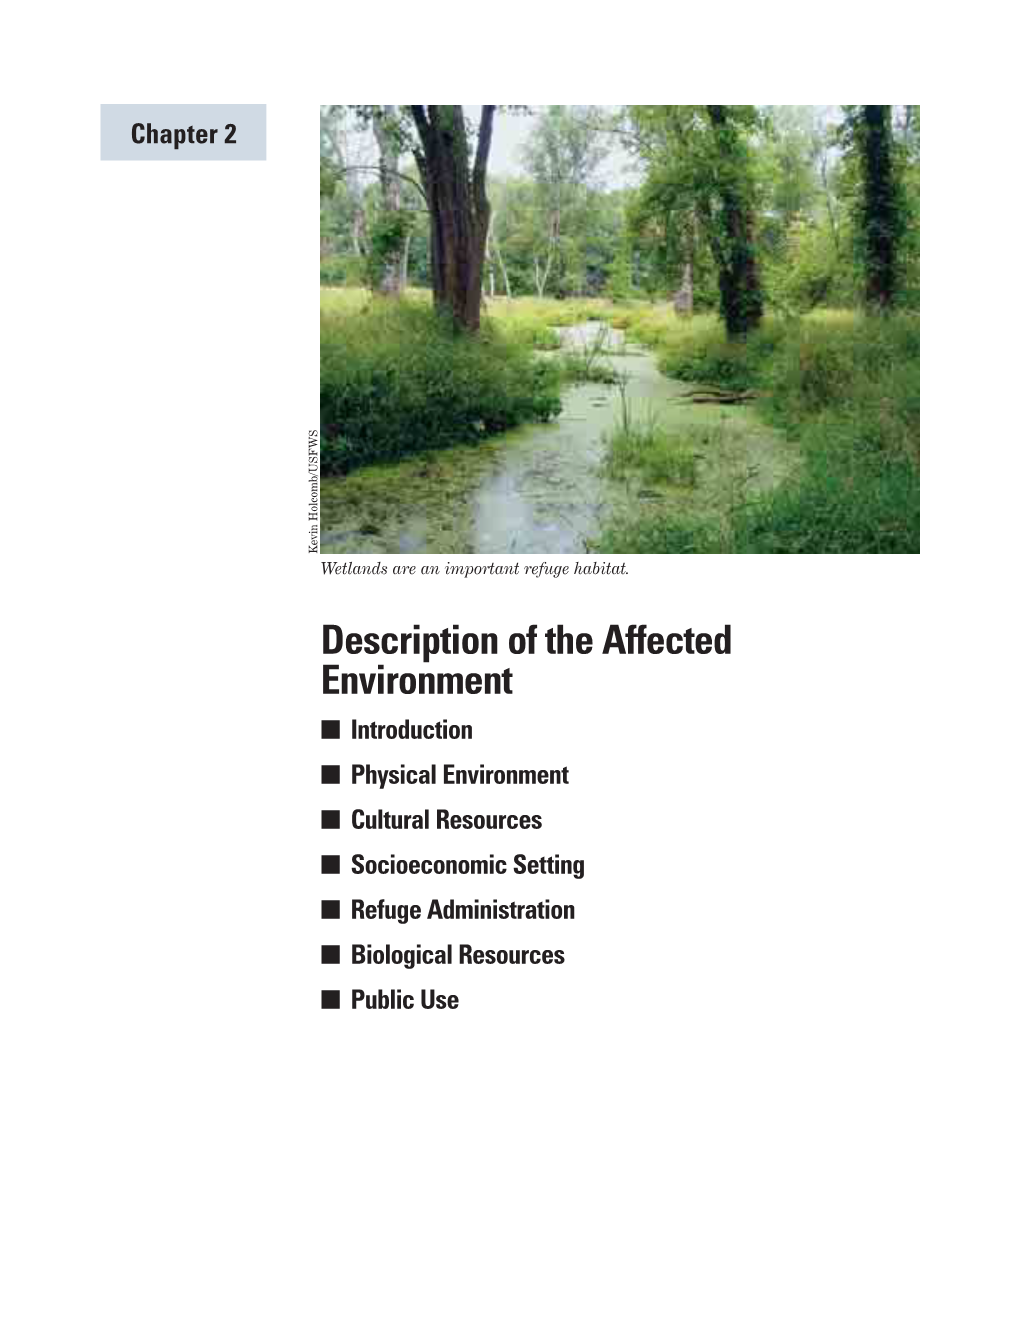 Chapter 2: Description of the Affected Environment